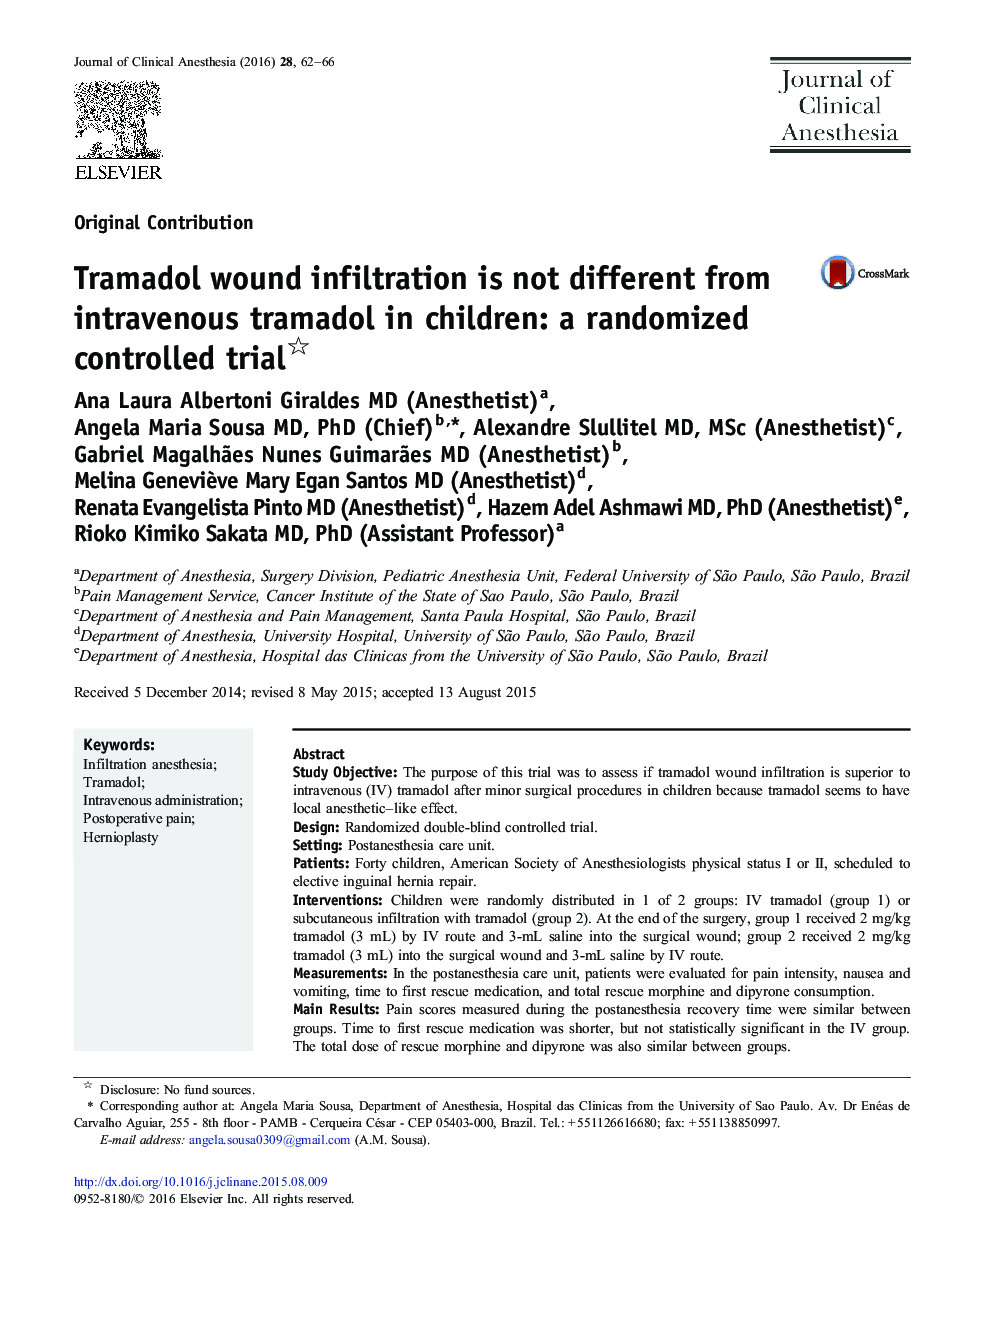 Tramadol wound infiltration is not different from intravenous tramadol in children: a randomized controlled trial 